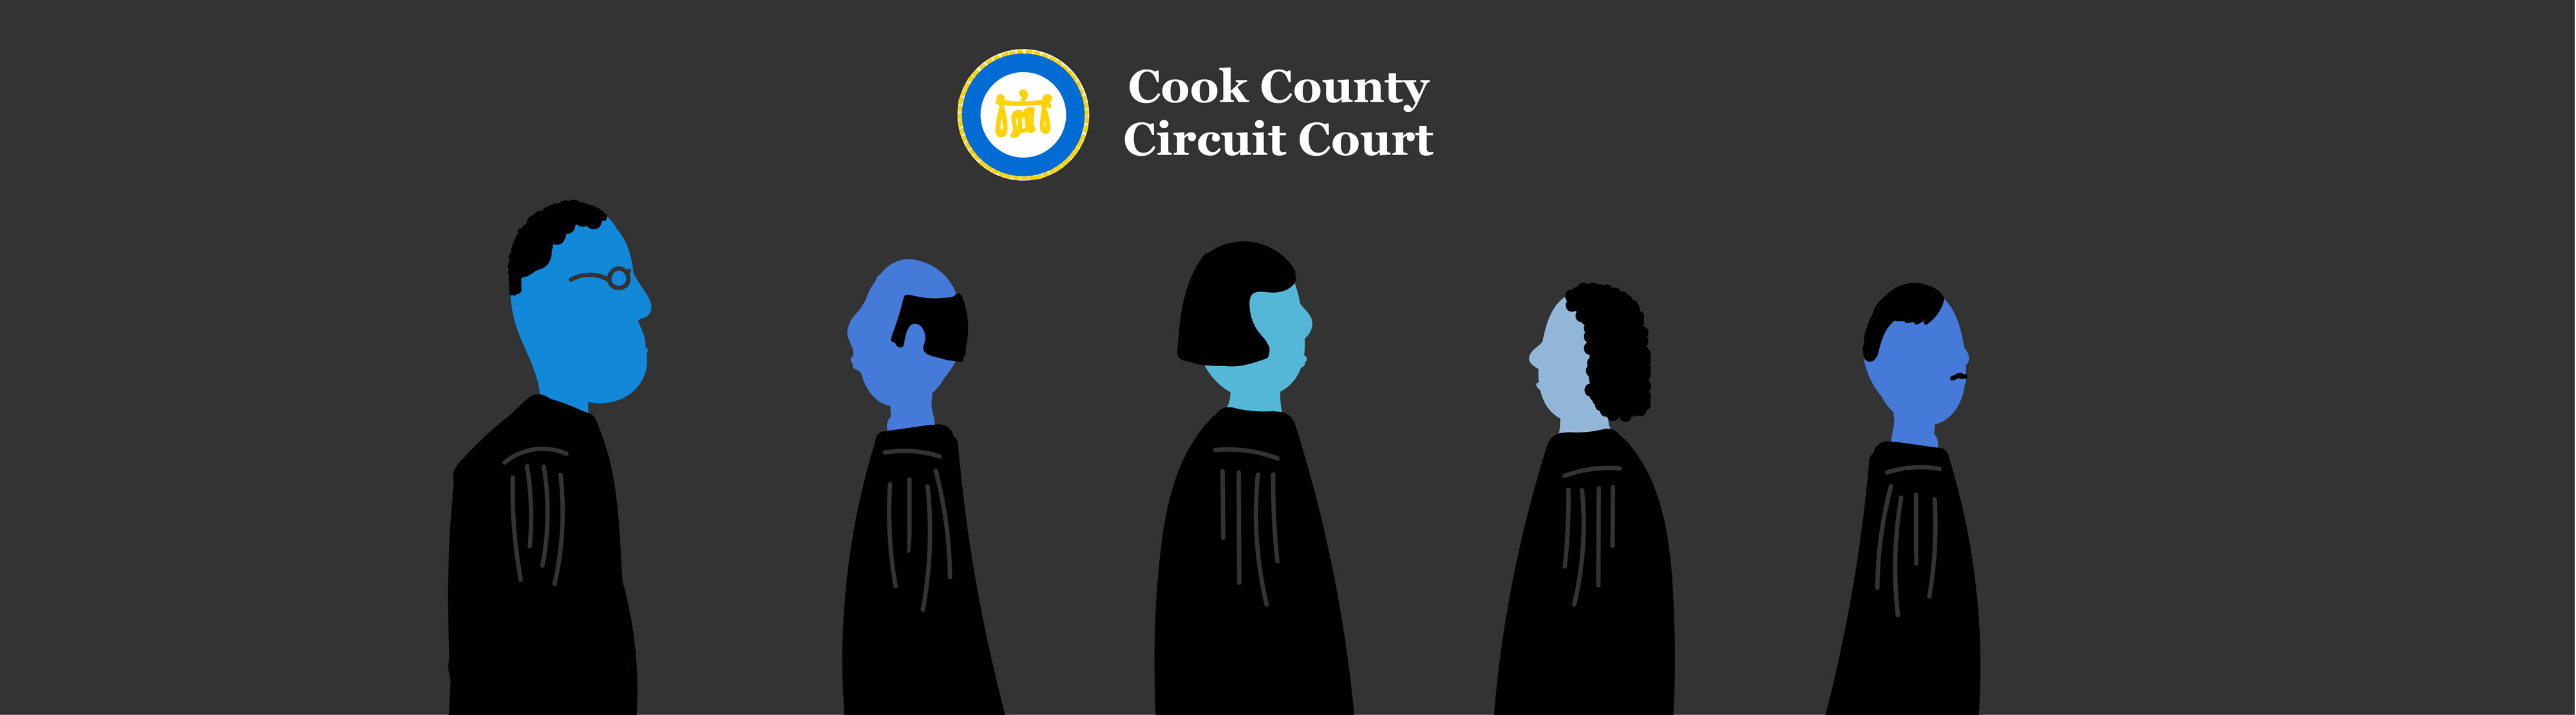 Cook County Circuit Court